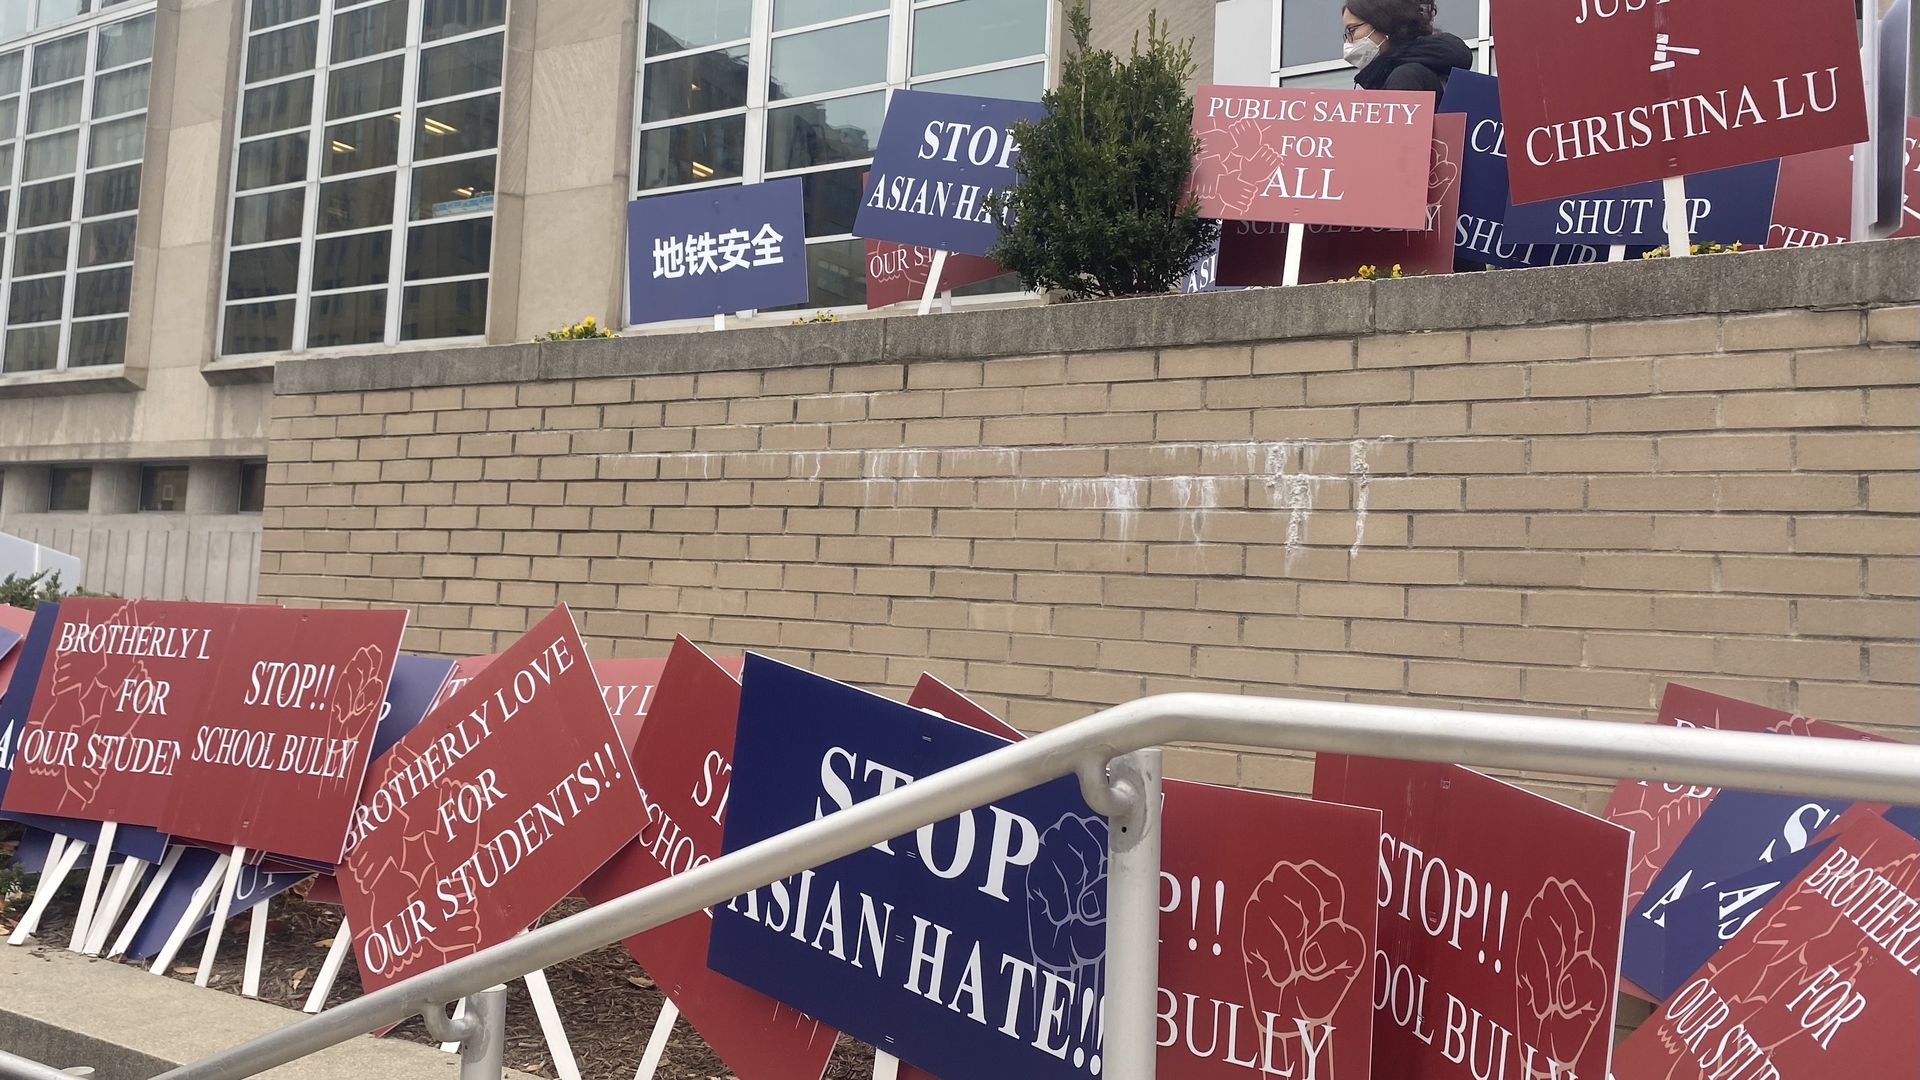 Supporters' signs at a rally against Asian hate in Philadelphia